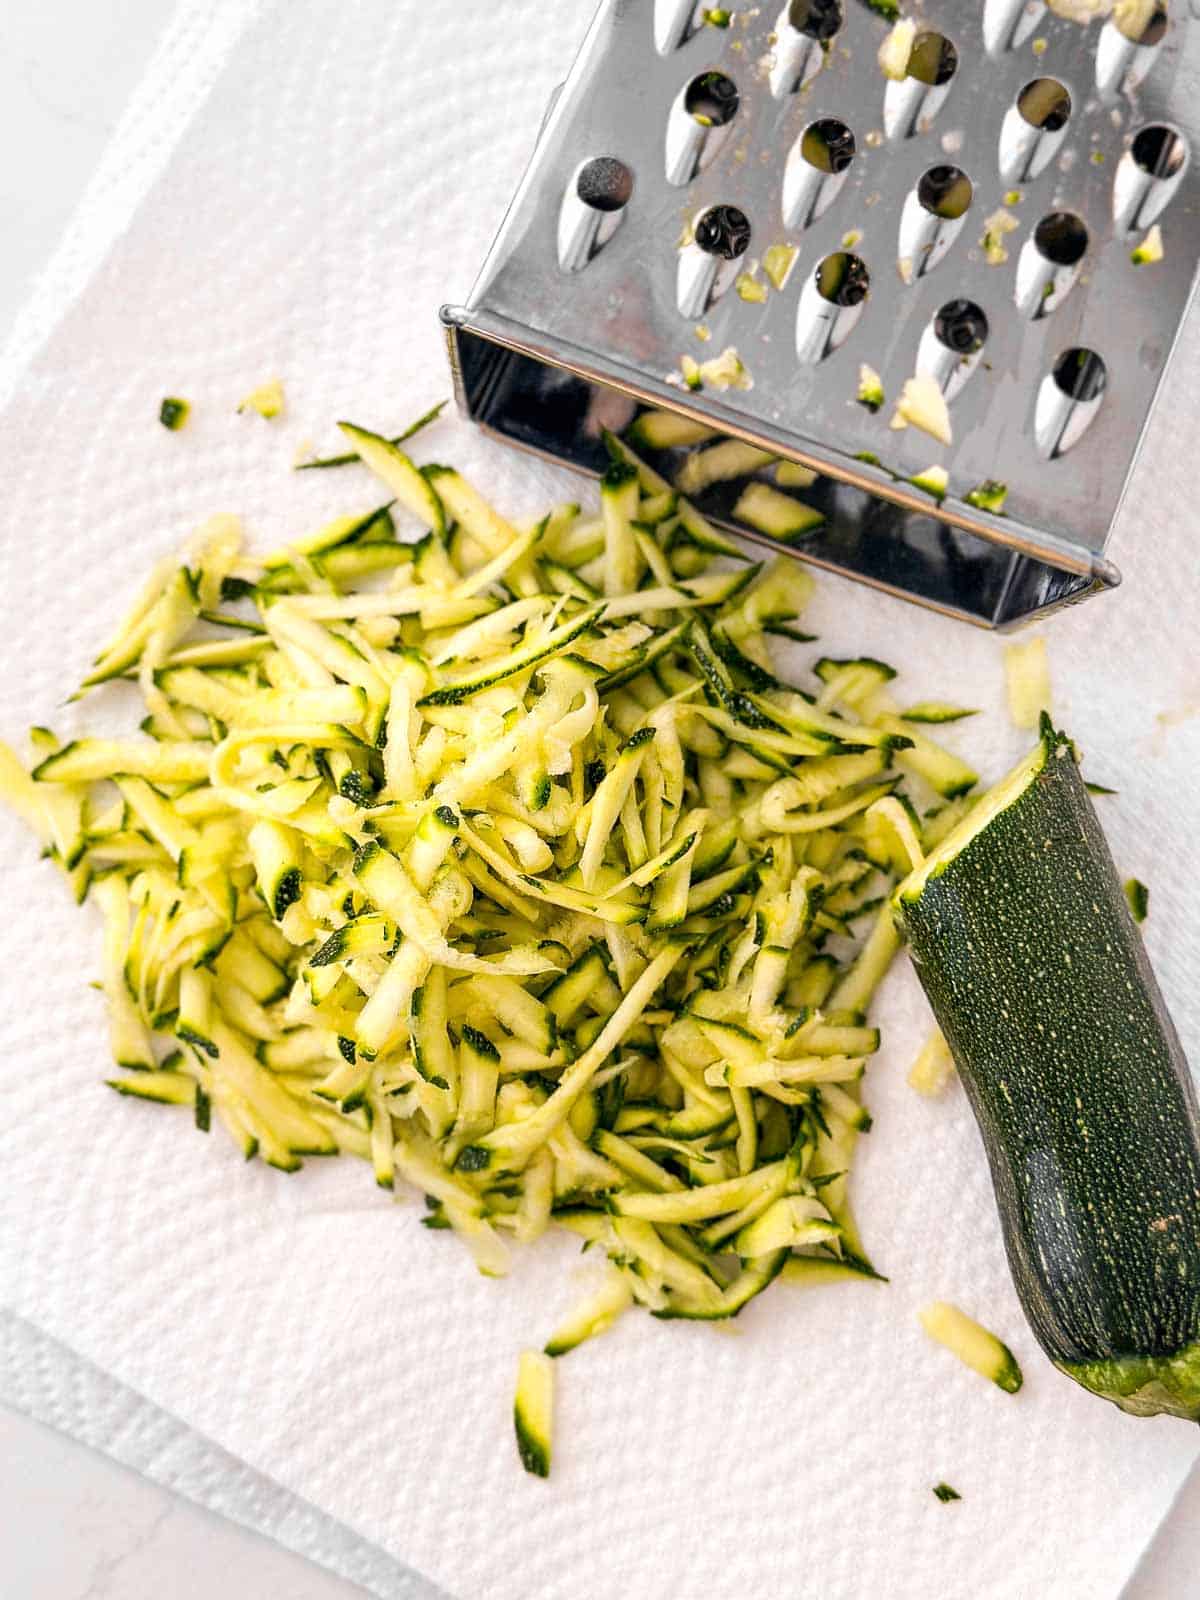 shredded zucchini on paper towel next to box grater